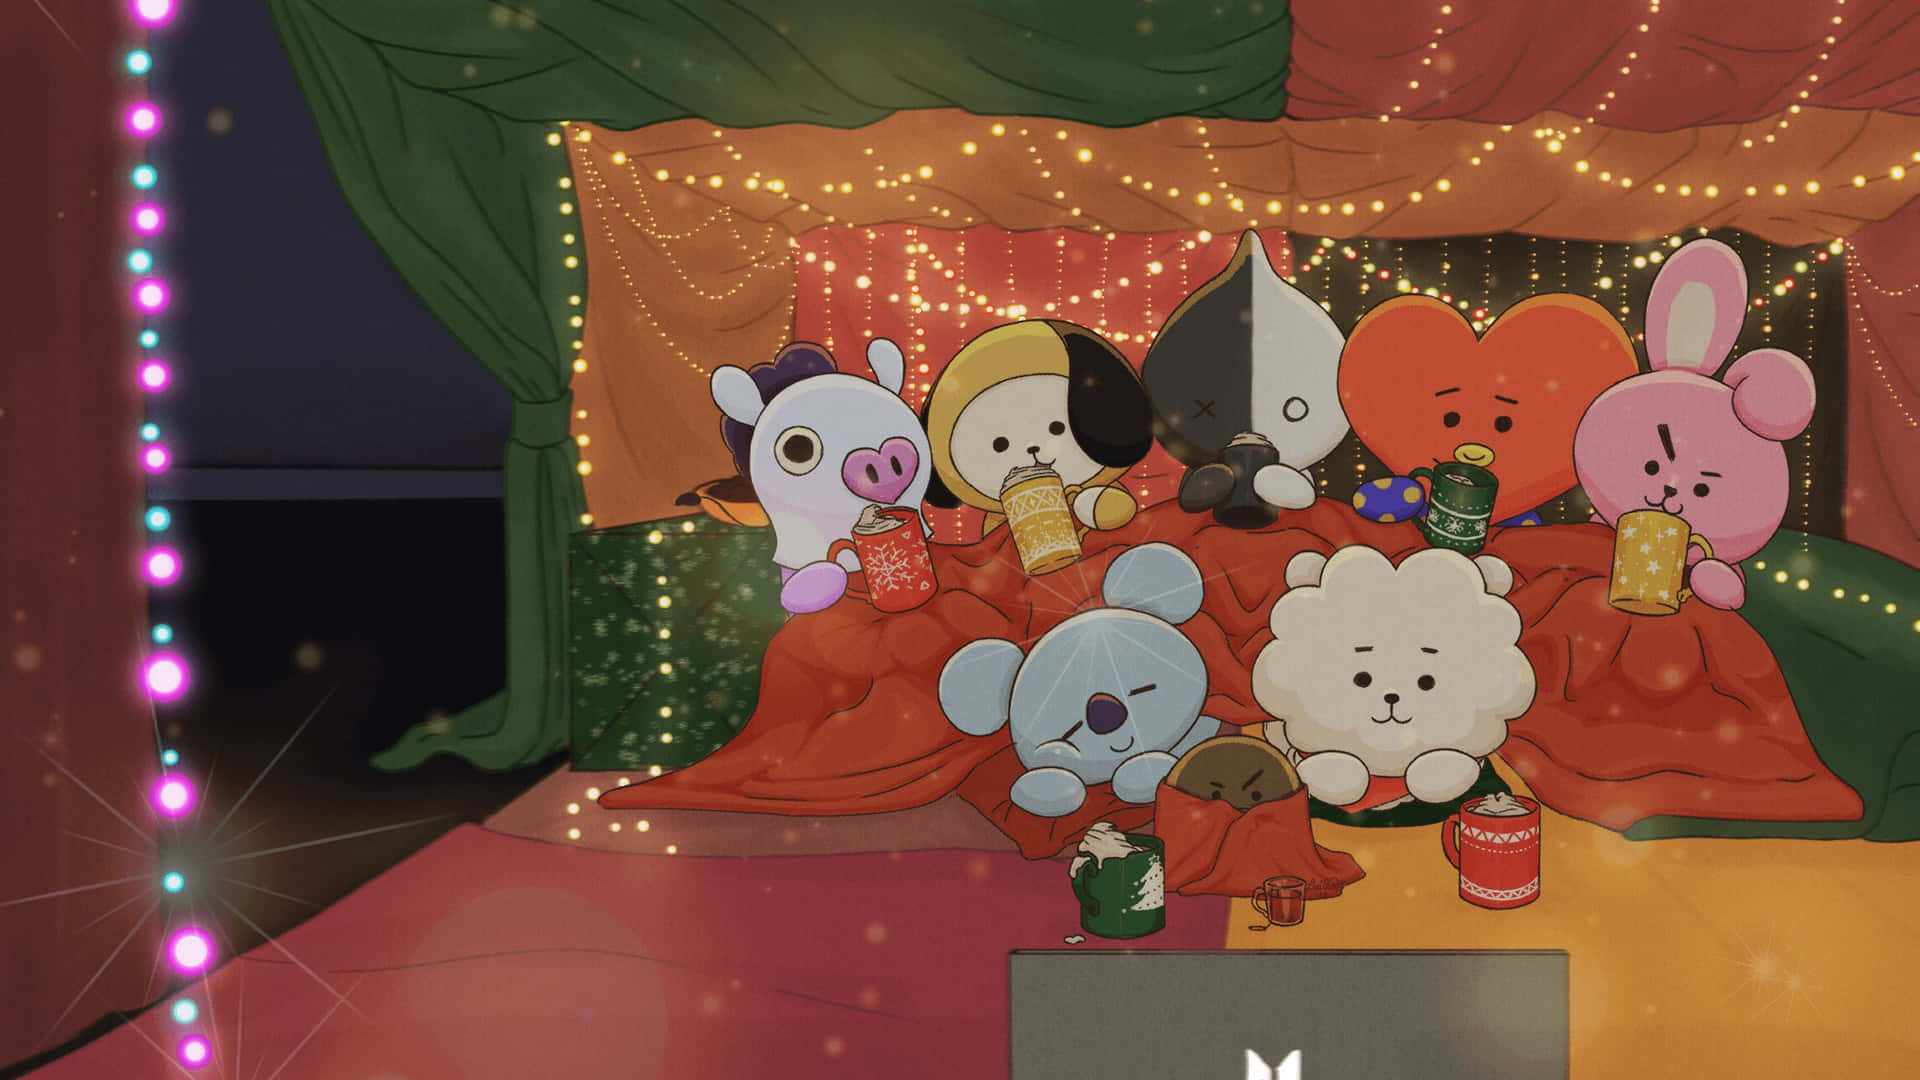 BTS's fun and creative Bt21 characters celebrating their success!